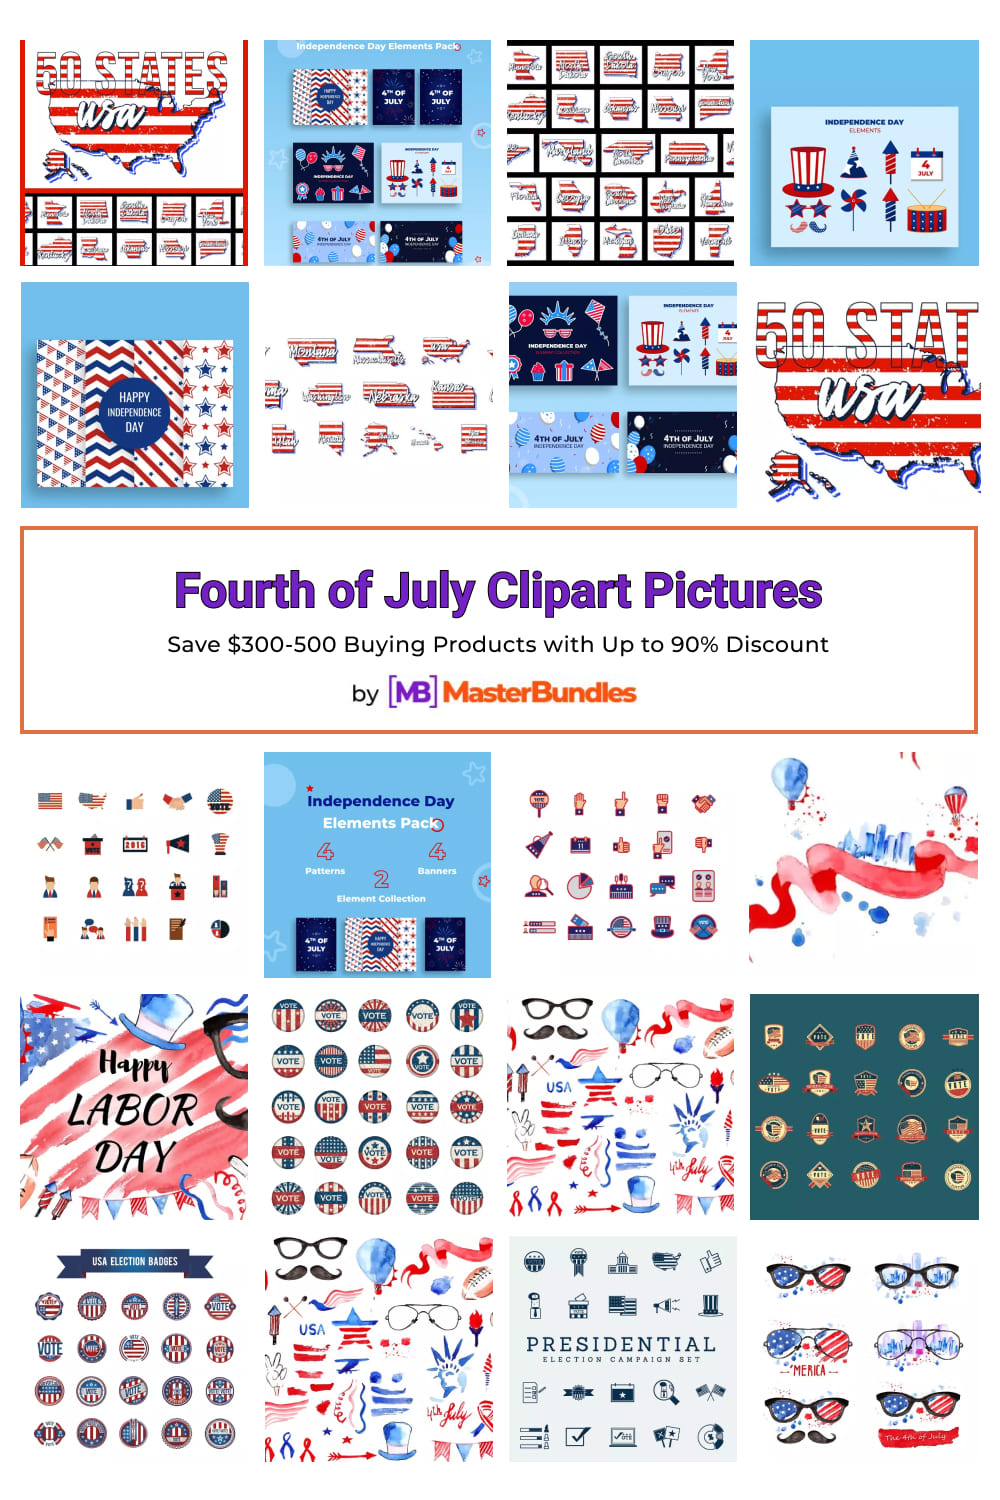 Fourth of July Clipart Pictures Pinterest image.